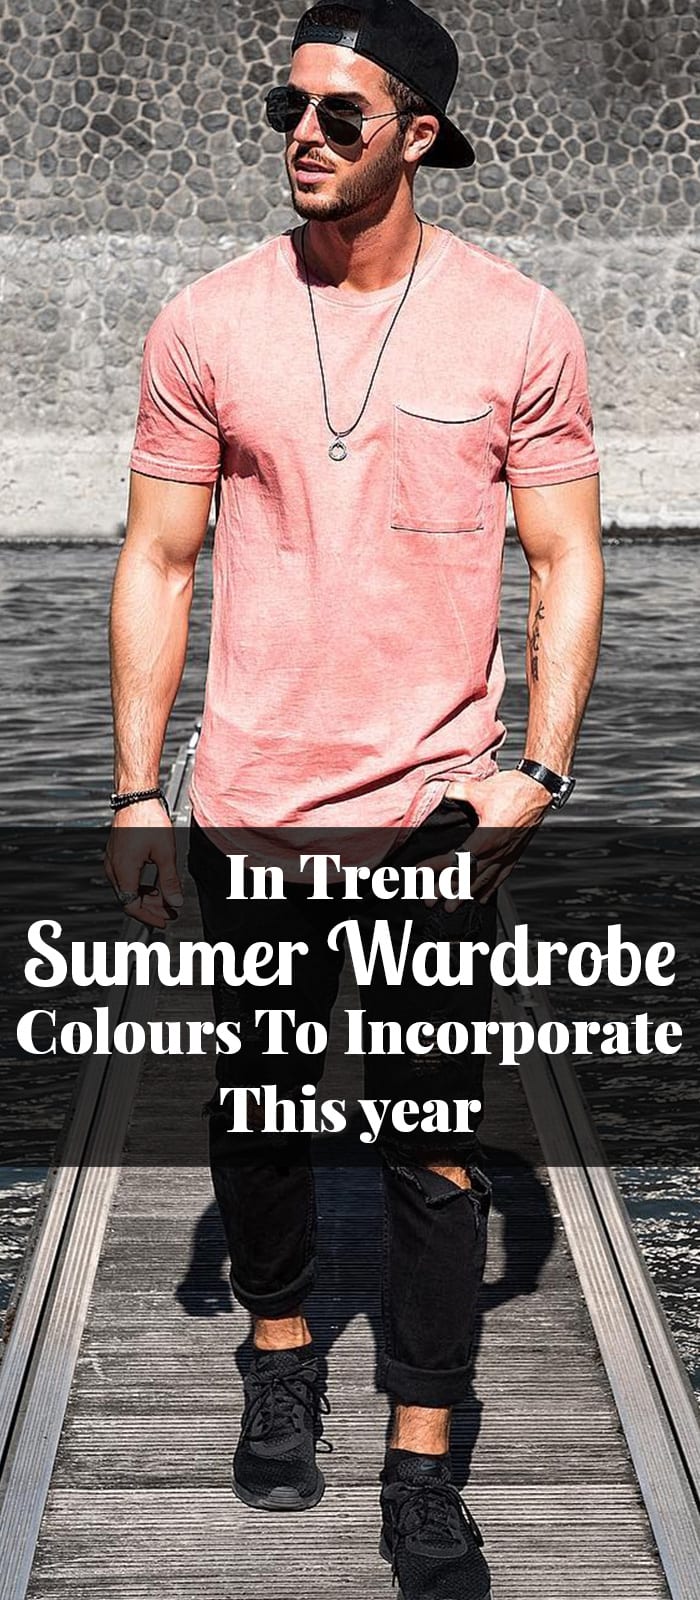 In Trend Summer Wardrobe Colours To Incorporate This year